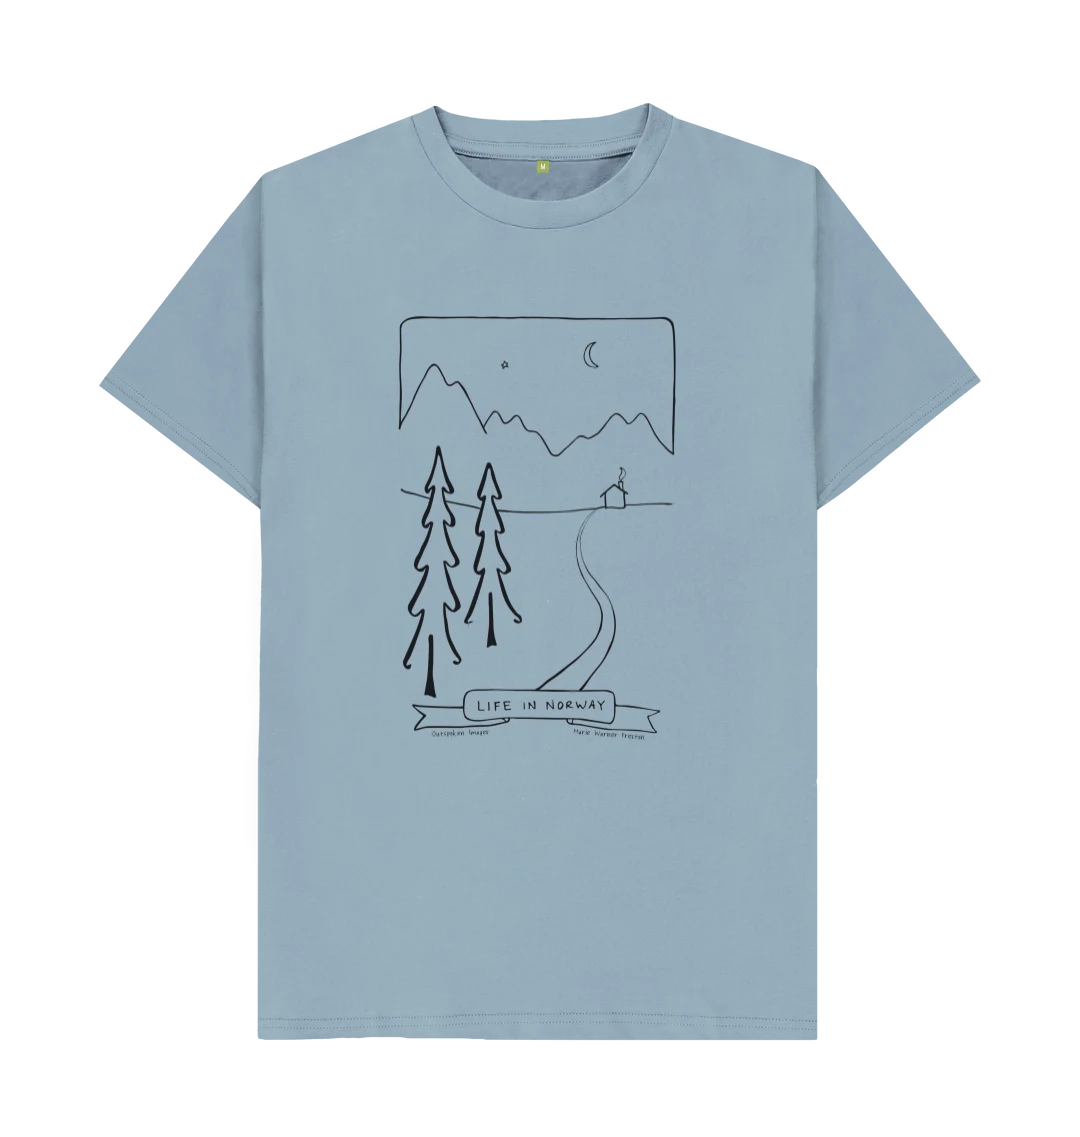 Life in Norway t-shirt ©2021 Outspoken Images by Marie Warner Preston